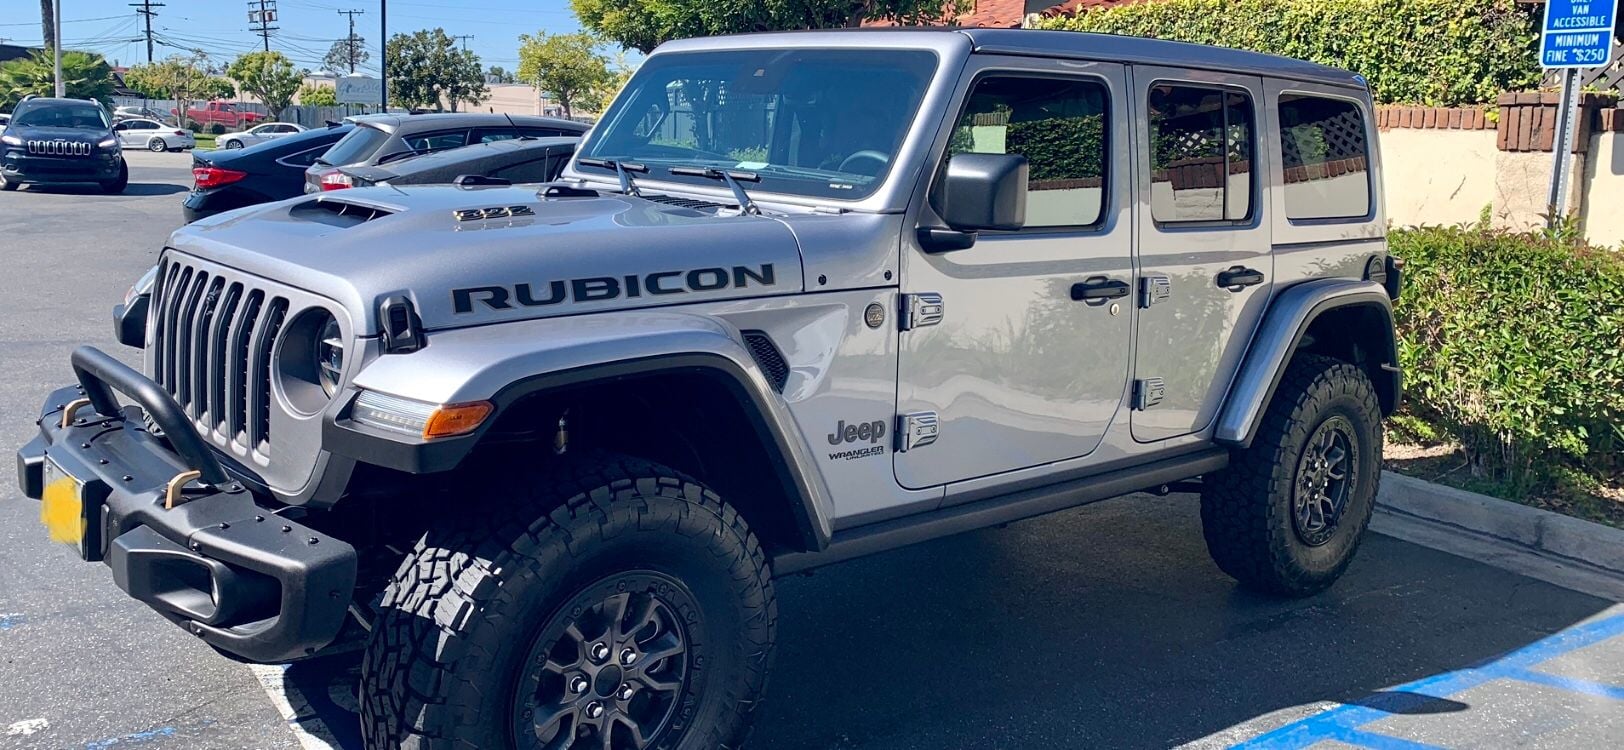 2020 g63 owner bought a 2021 Jeep rubicon 392 -  Forums